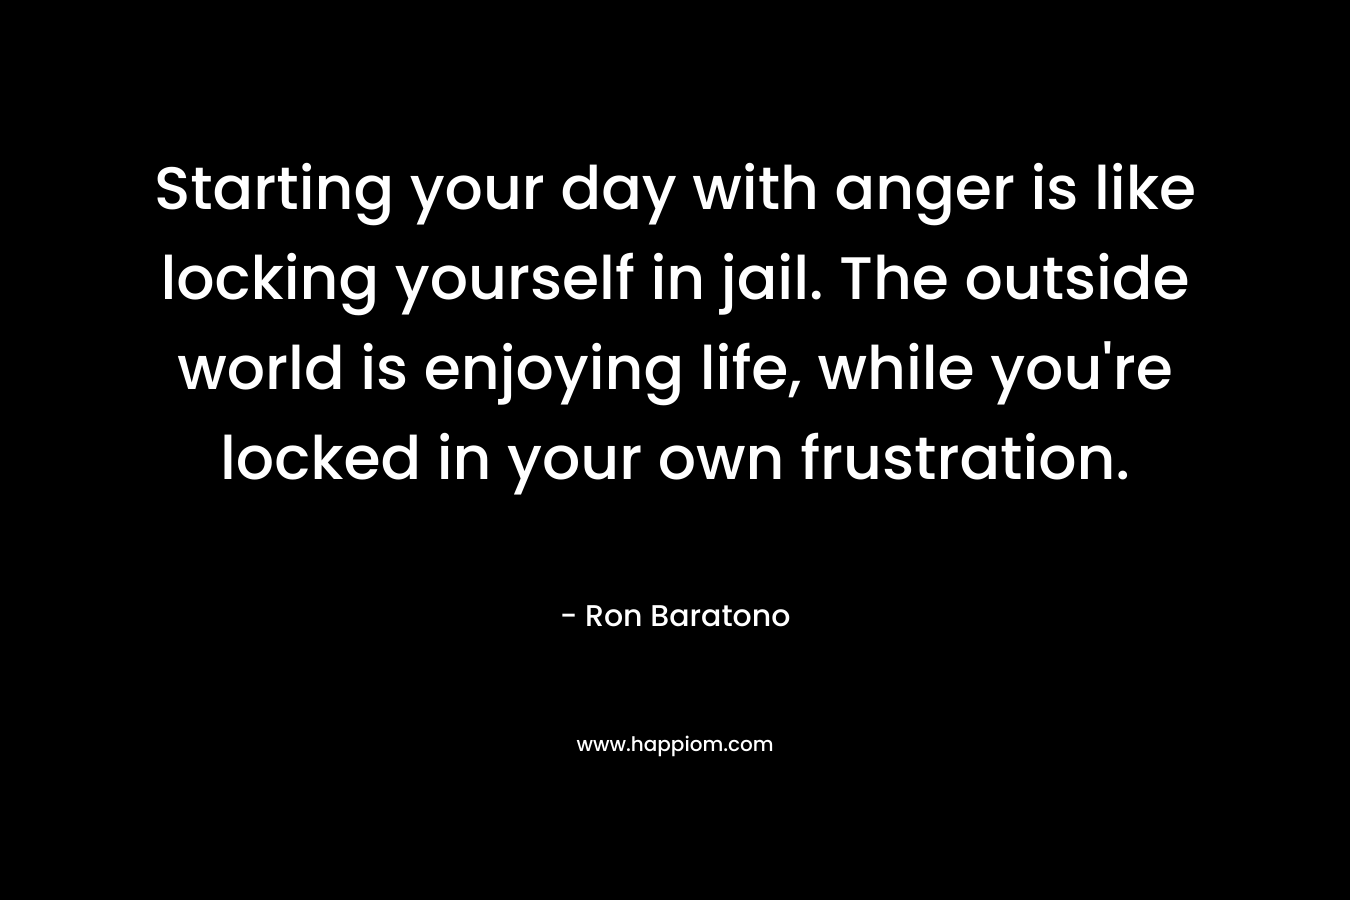 Starting your day with anger is like locking yourself in jail. The outside world is enjoying life, while you’re locked in your own frustration. – Ron Baratono